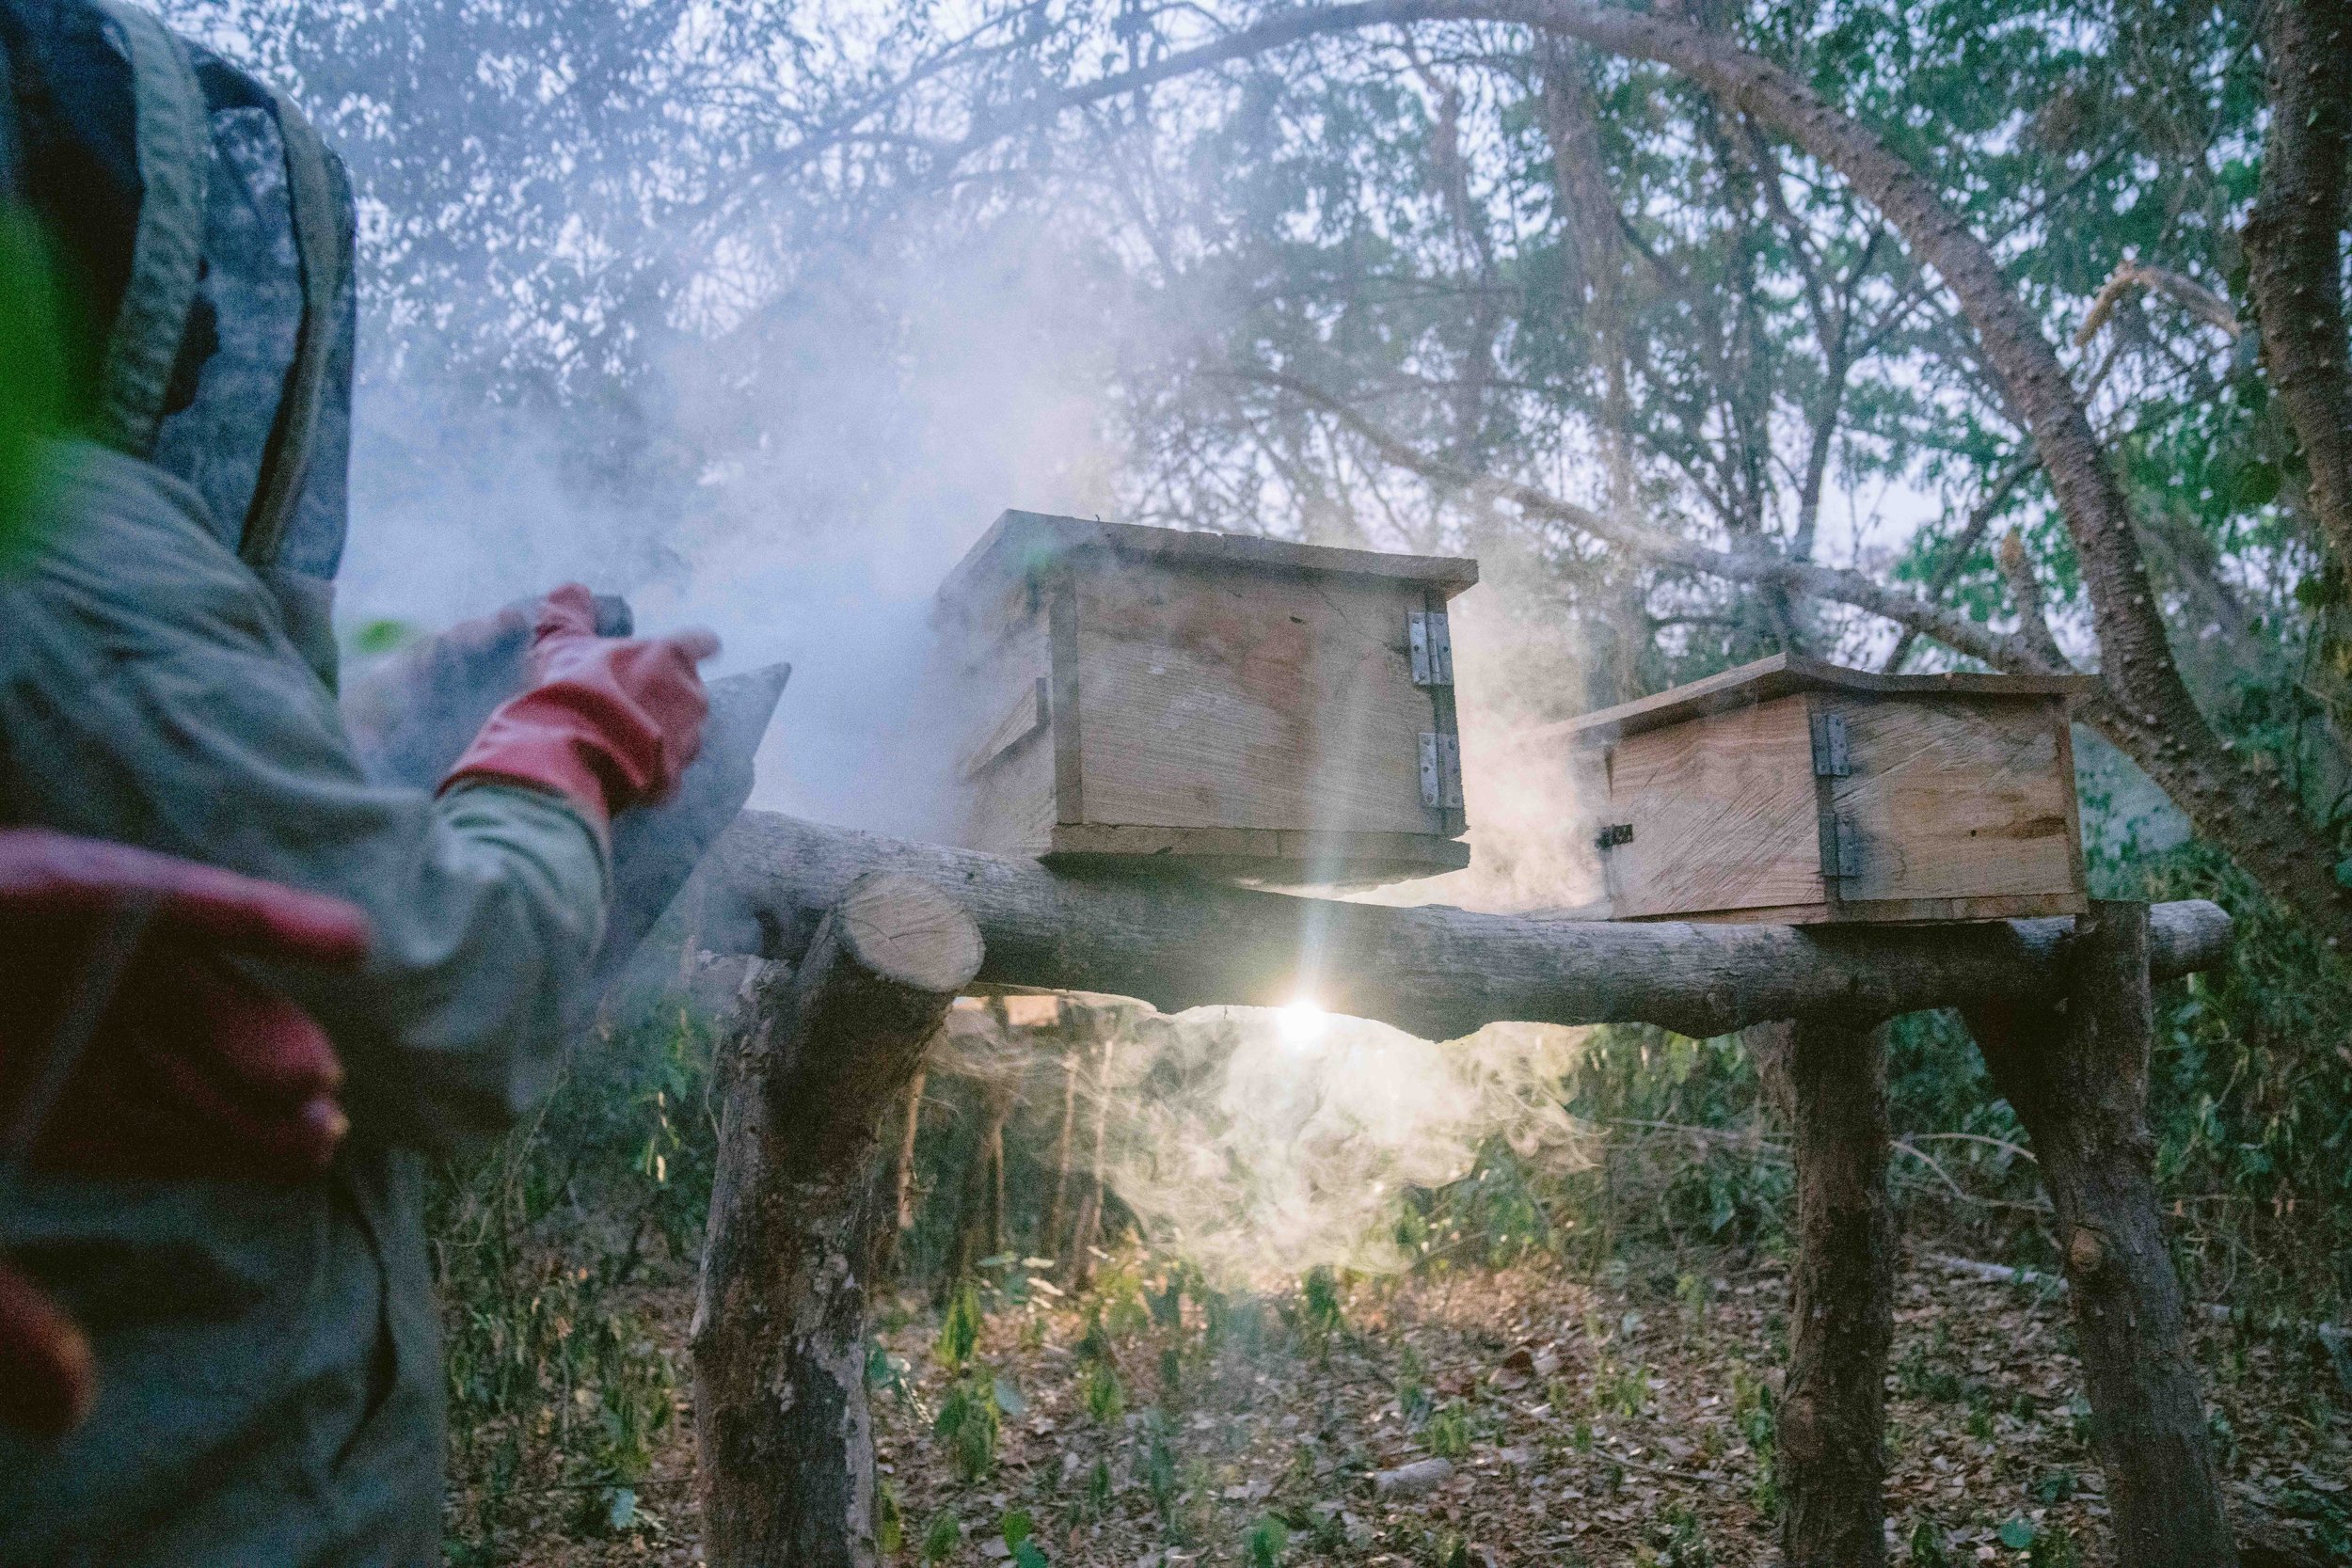  The women smoke the hives to calm the bees before harvesting. 